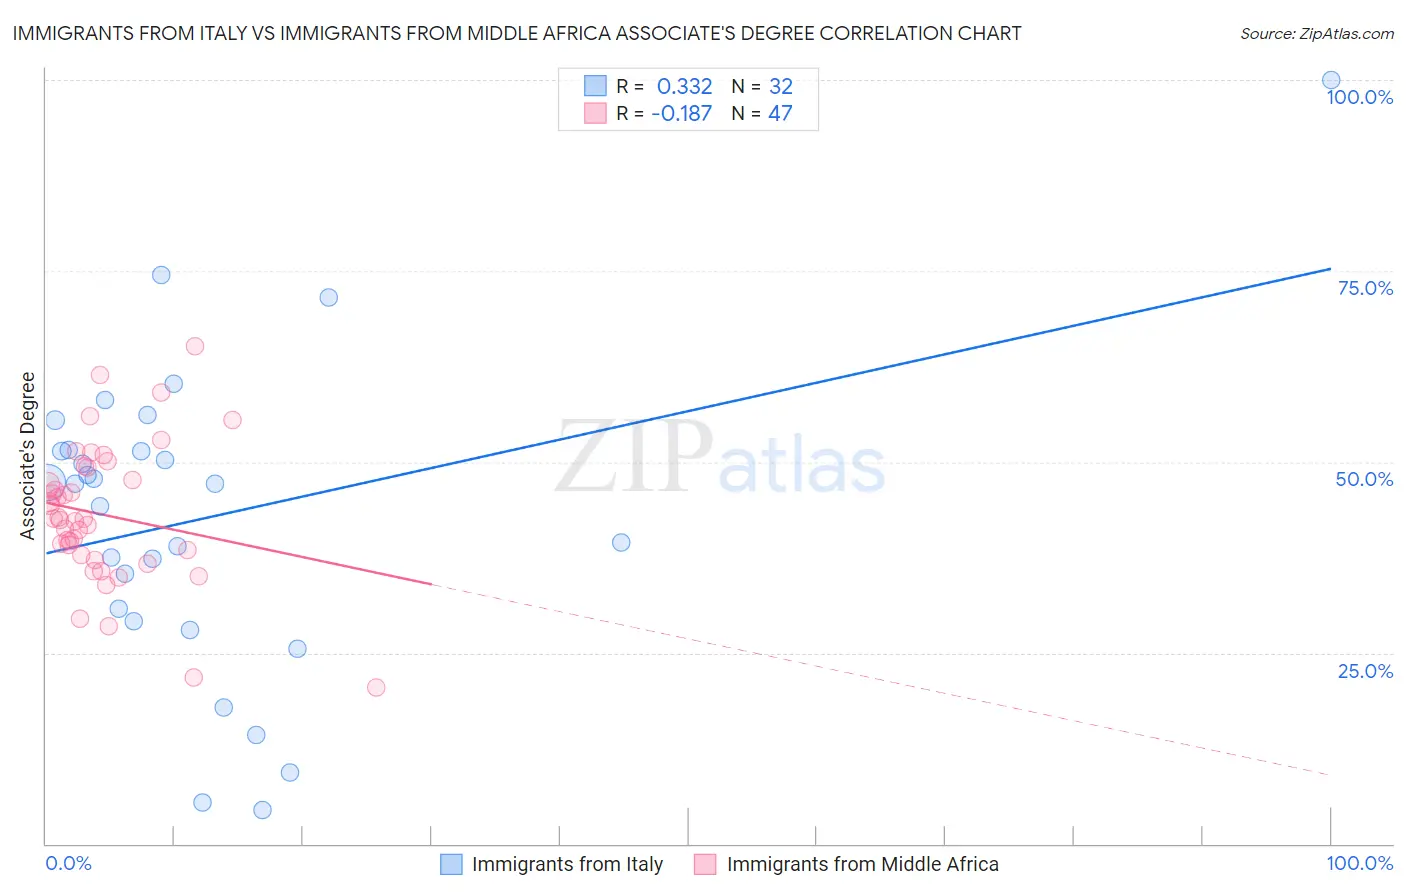 Immigrants from Italy vs Immigrants from Middle Africa Associate's Degree